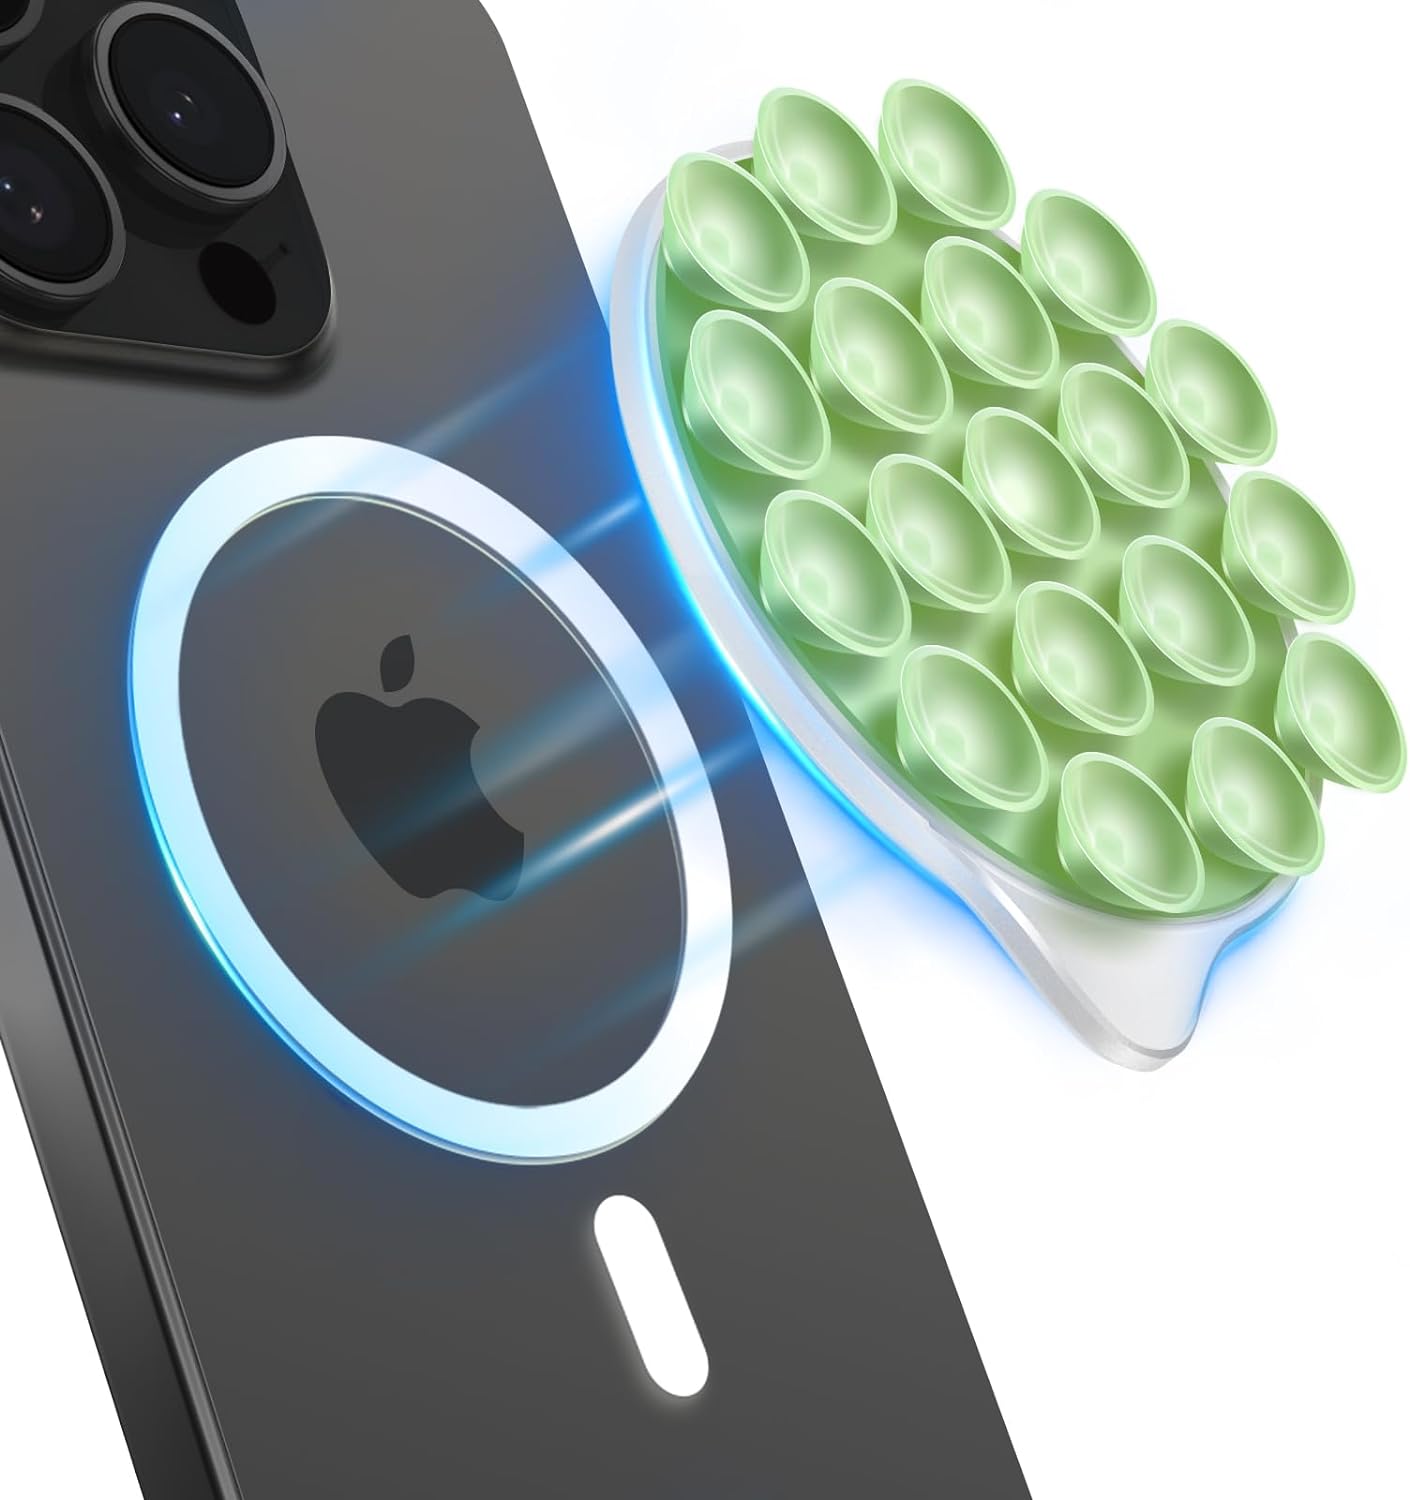 MagSuction Silicone Suction Cup Phone Mount for MagSafe (White & Green)